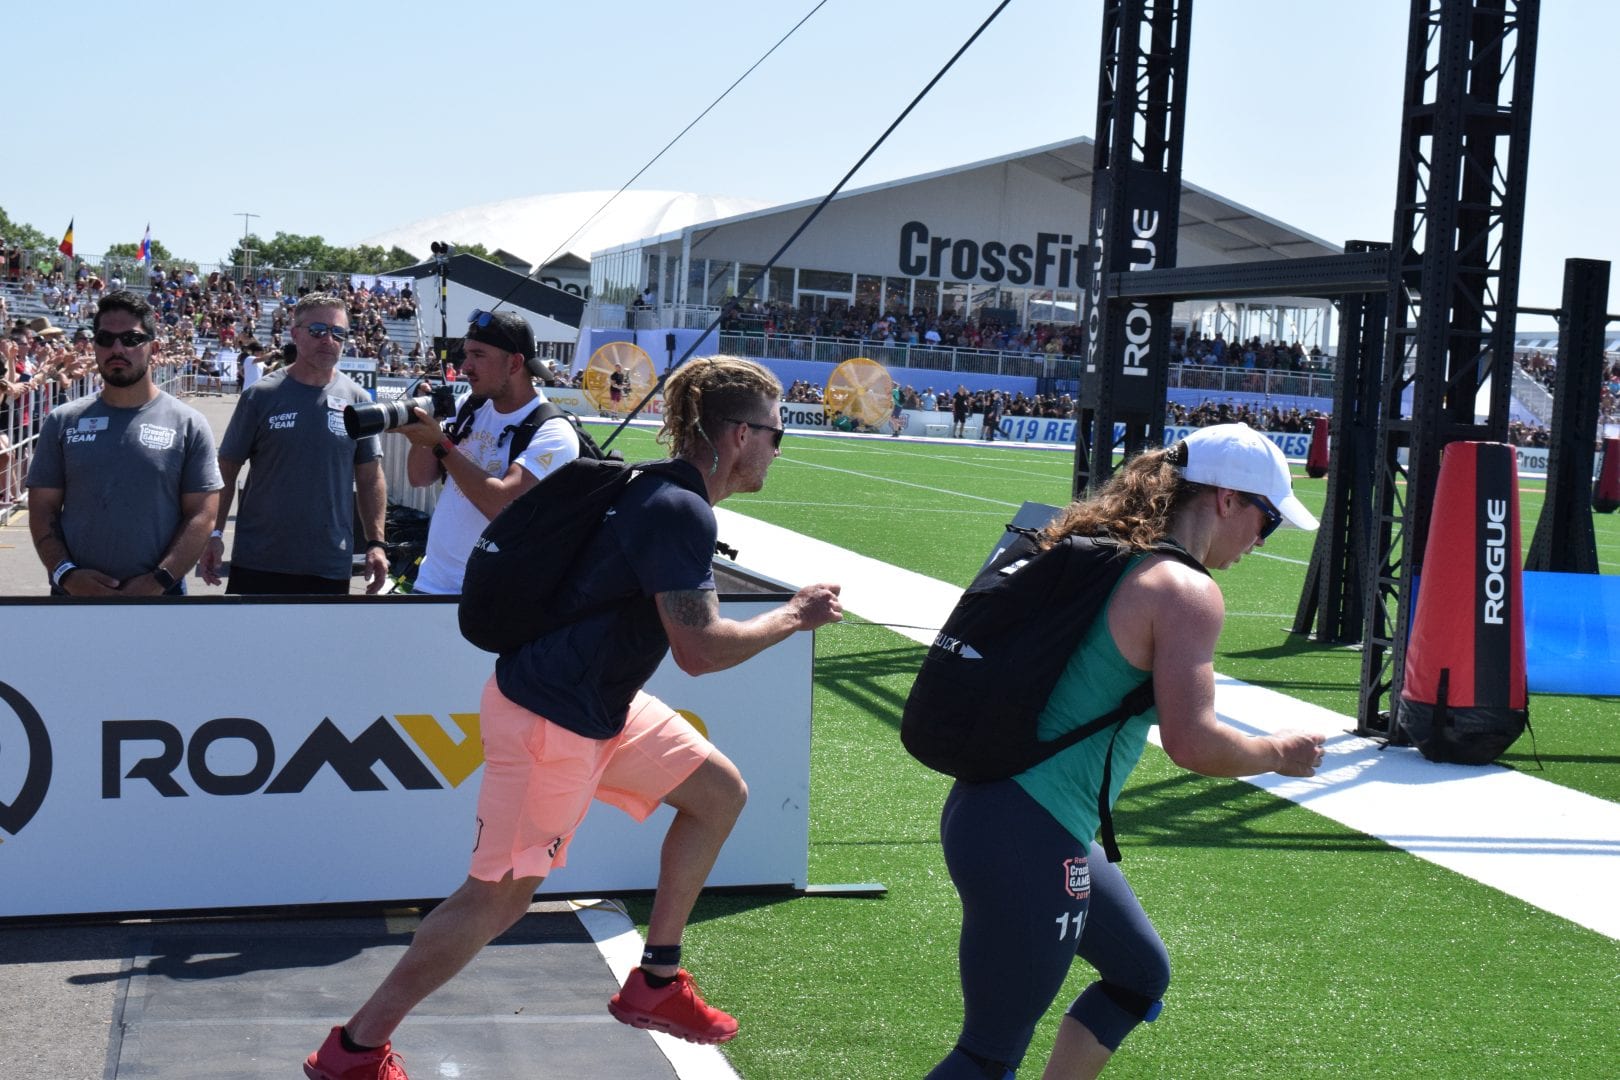 James Newbury of Australia completes the Ruck Run event at the 2019 CrossFit Games